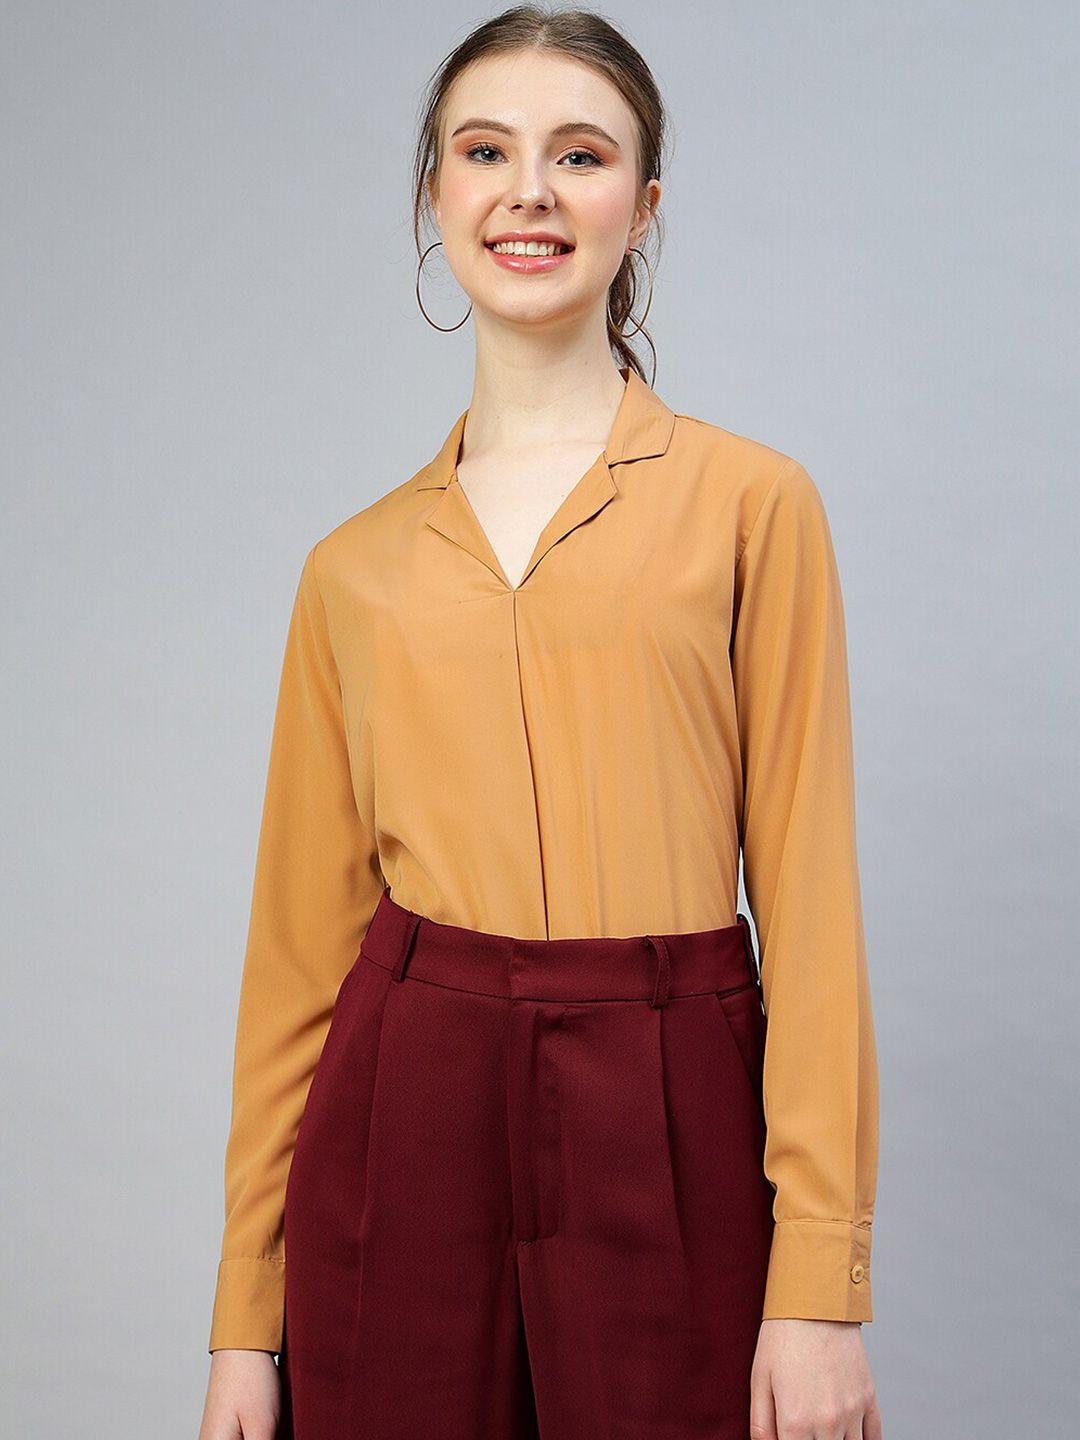 fithub beige roll-up sleeves shirt style top